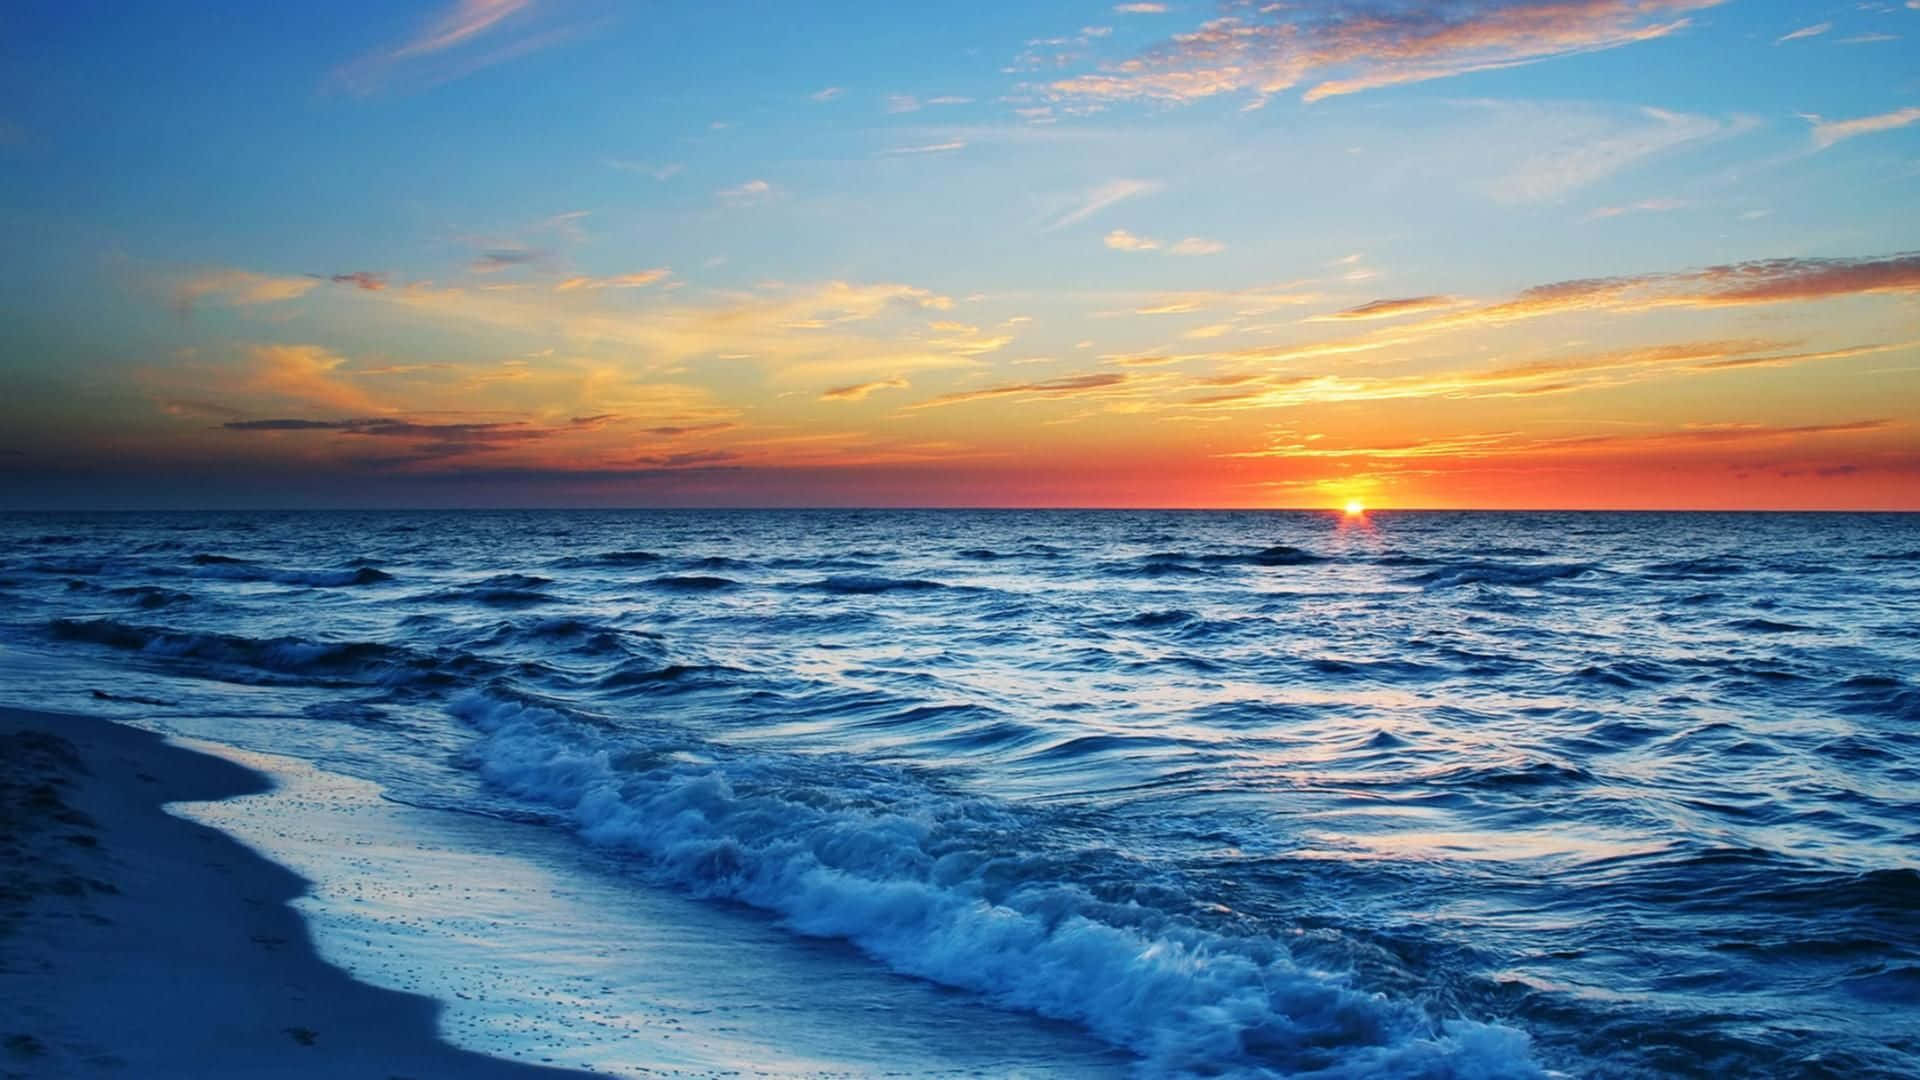 "A peaceful beach sunset for a tranquil evening."